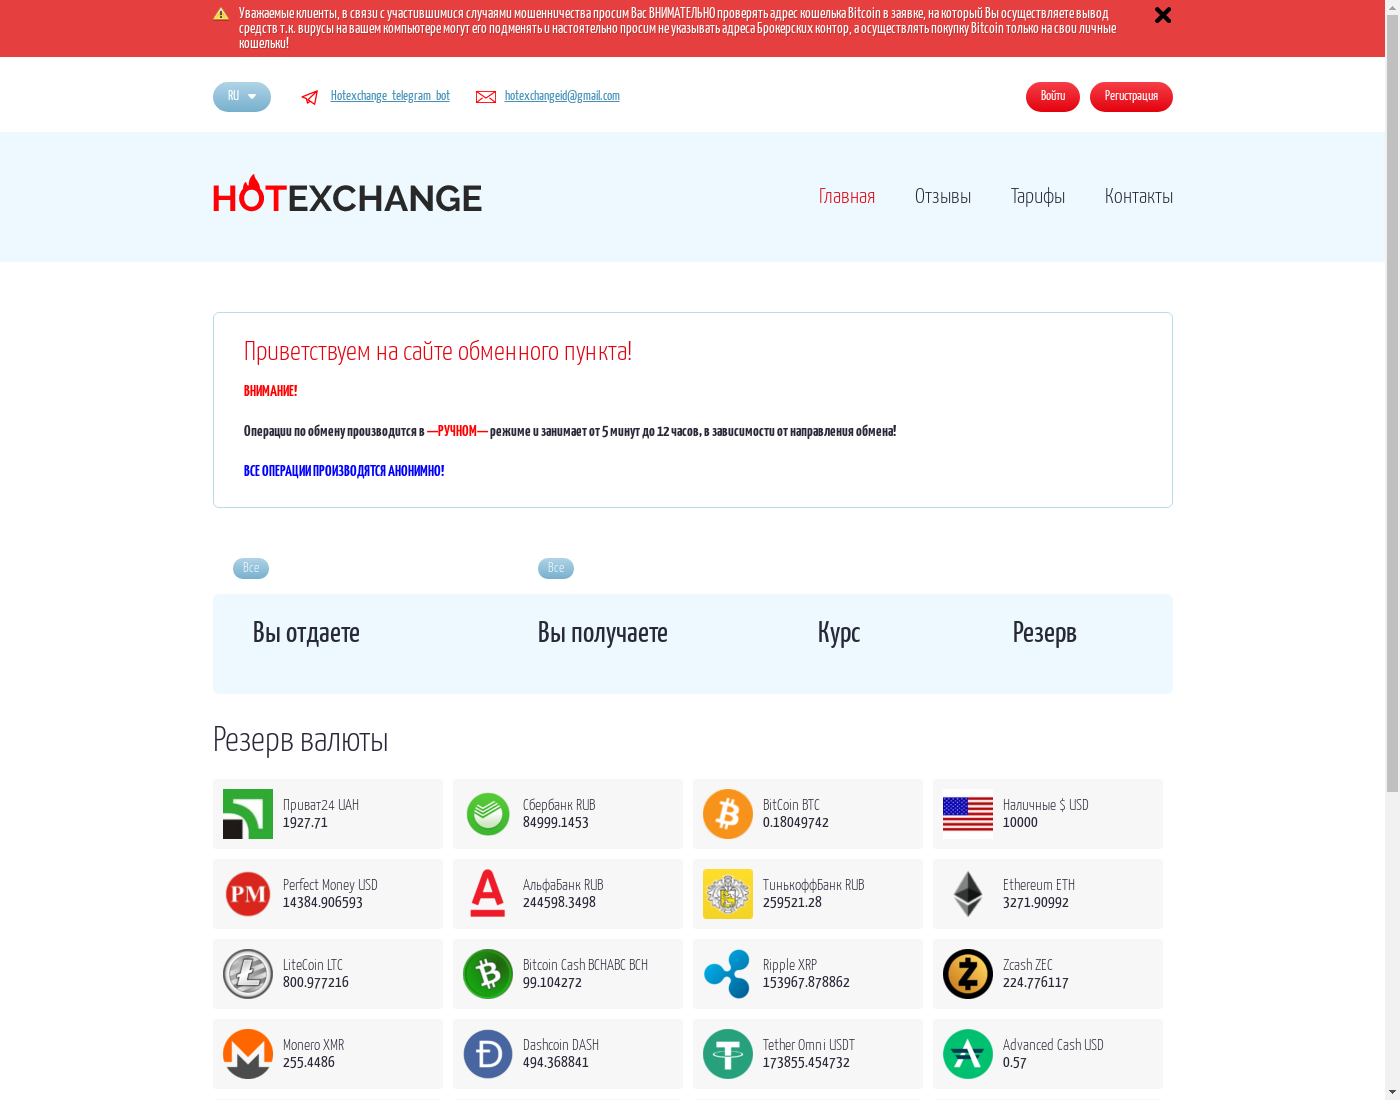 HotExchange user interface: the home page in English